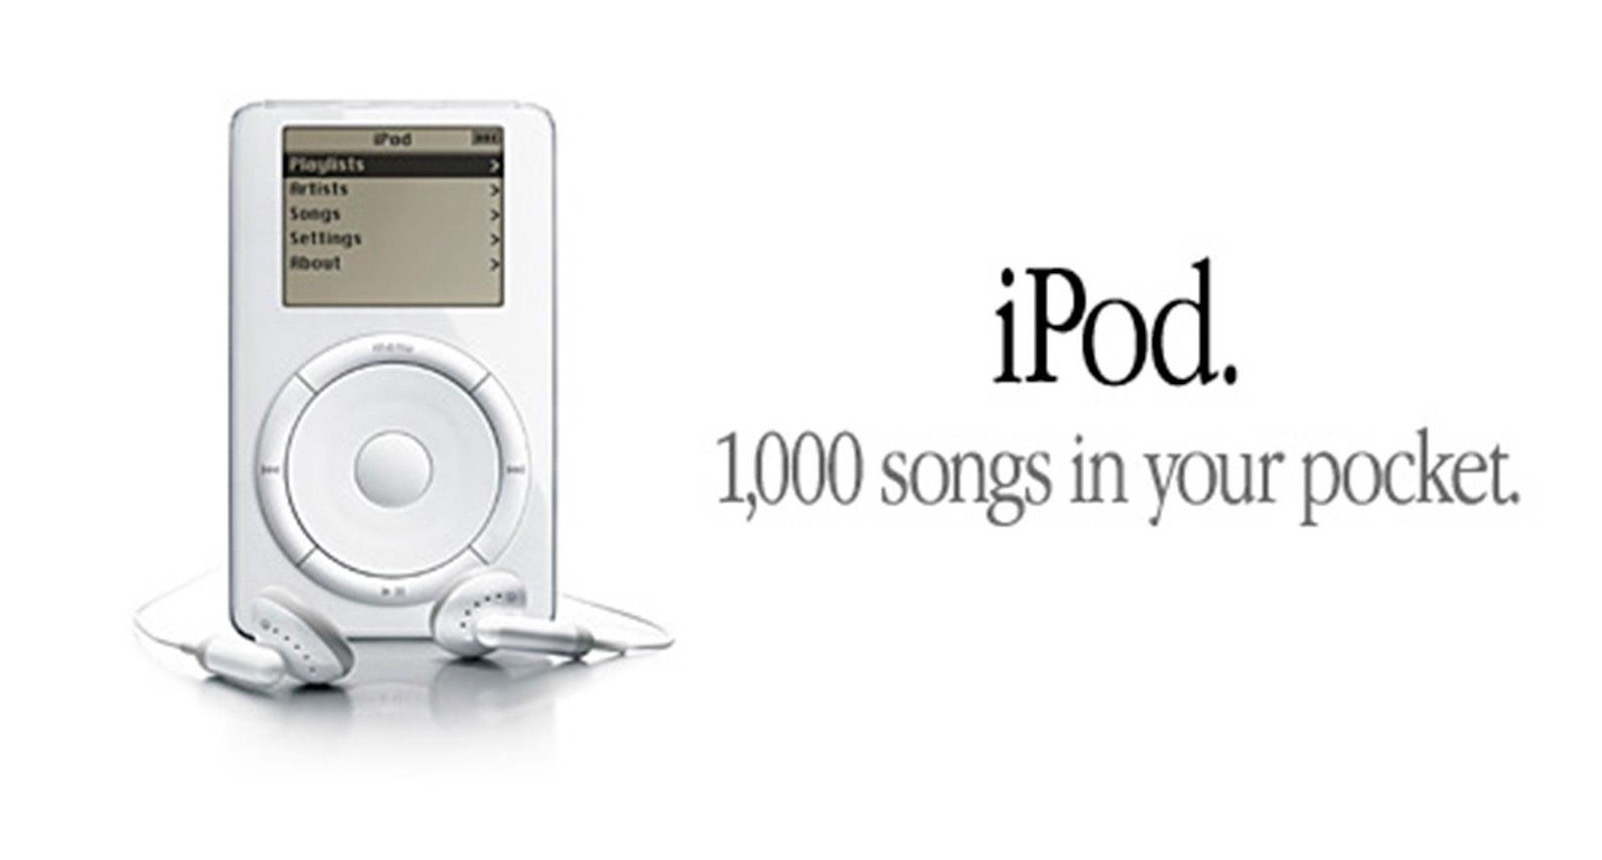 1,000 songs in your pocket